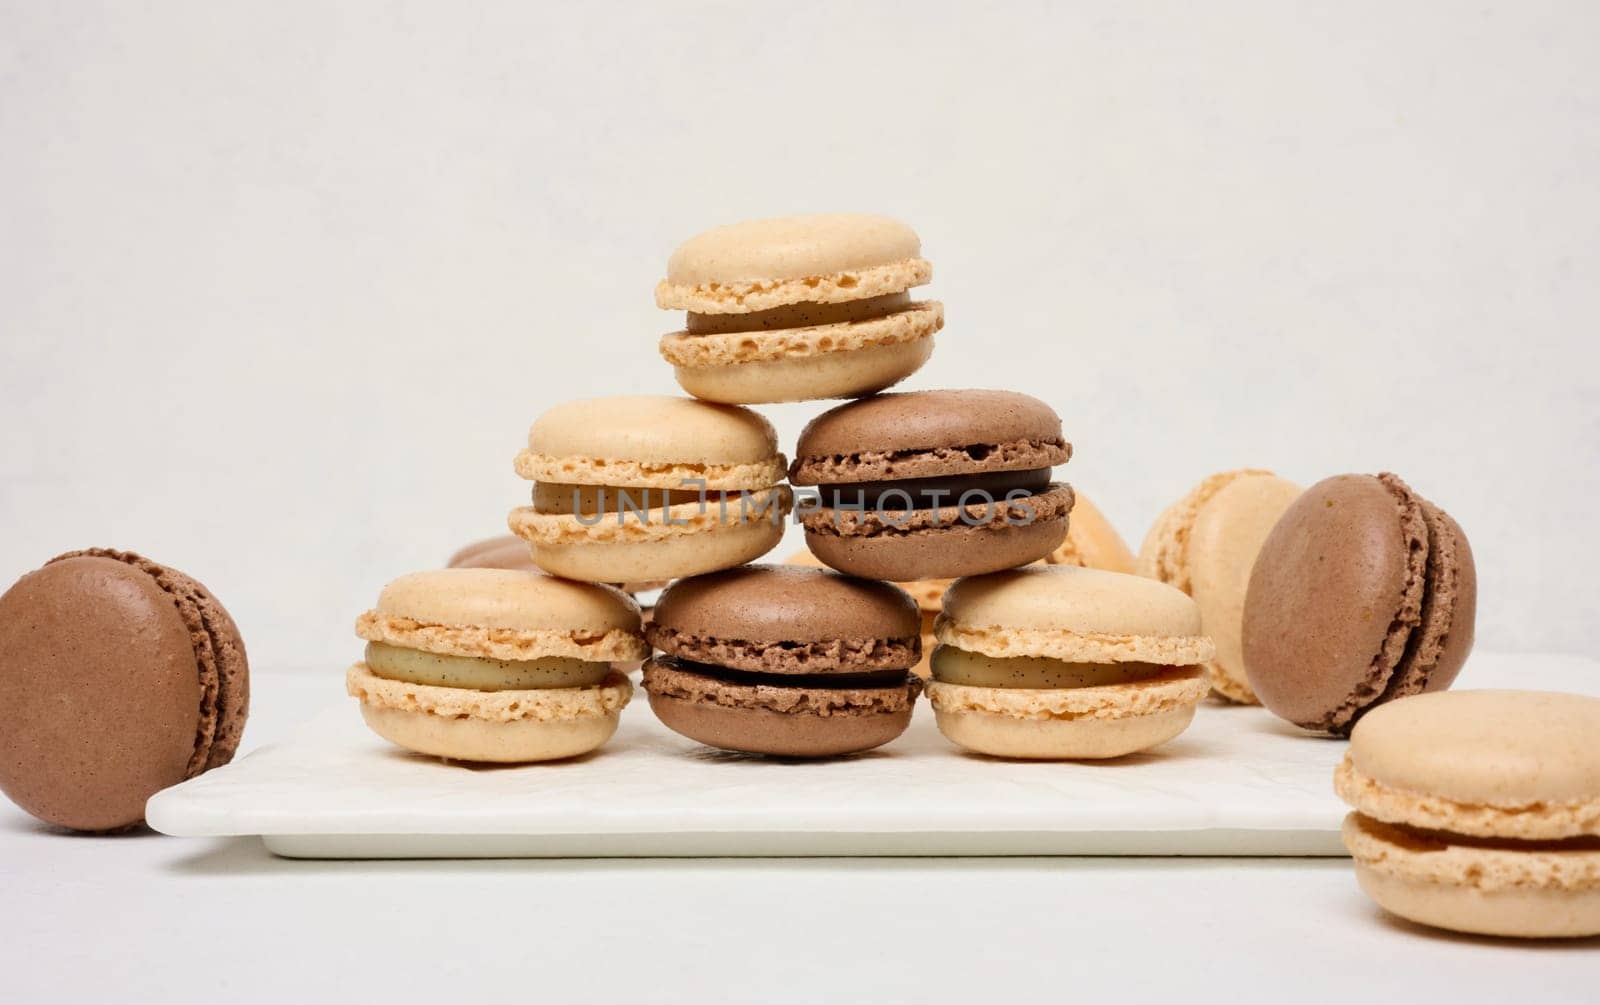 Chocolate macarons on a white background, dessert